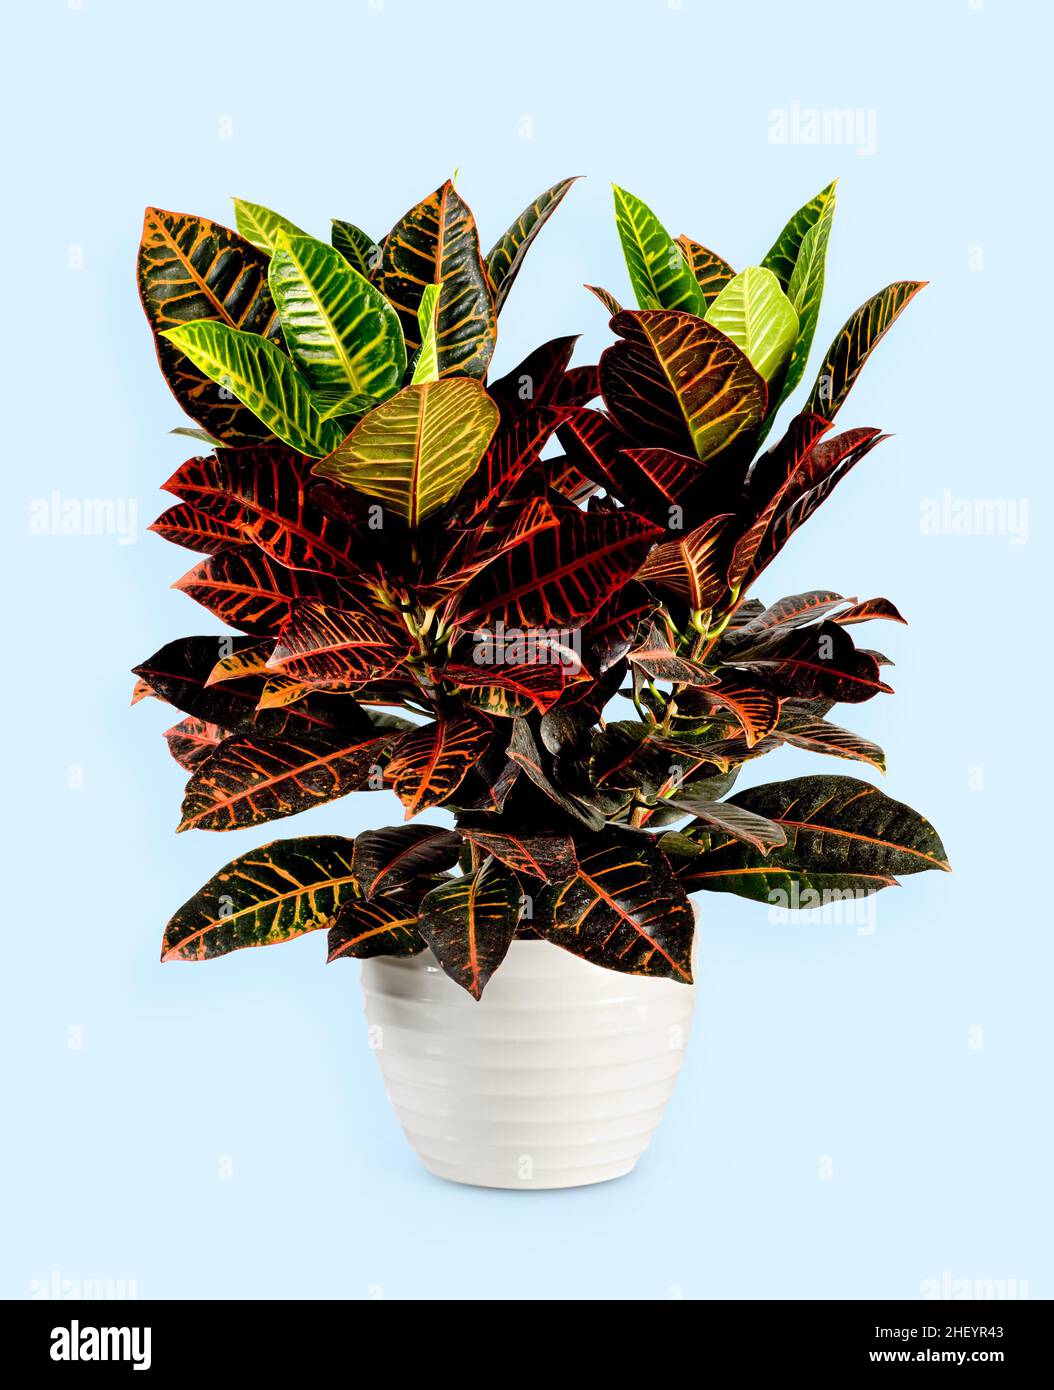 Isolated potted croton plant with lush red and green foliage placed against blue backdrop Stock Photo